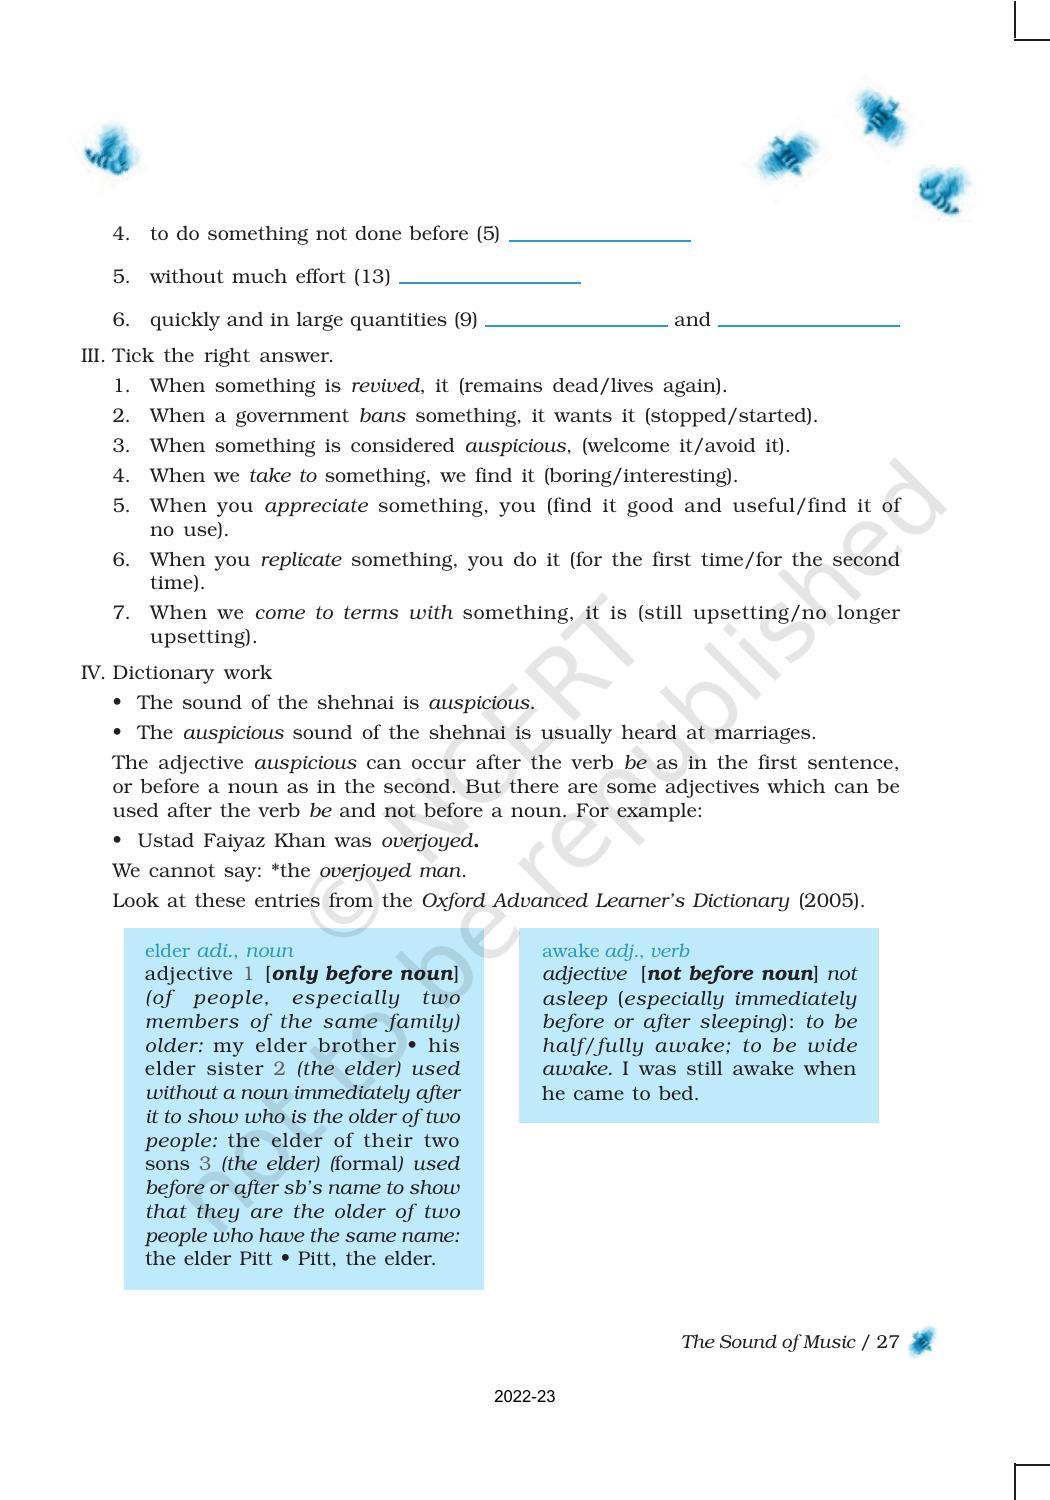 NCERT Book for Class 9 English Chapter 2 The Sound of Music - Page 11